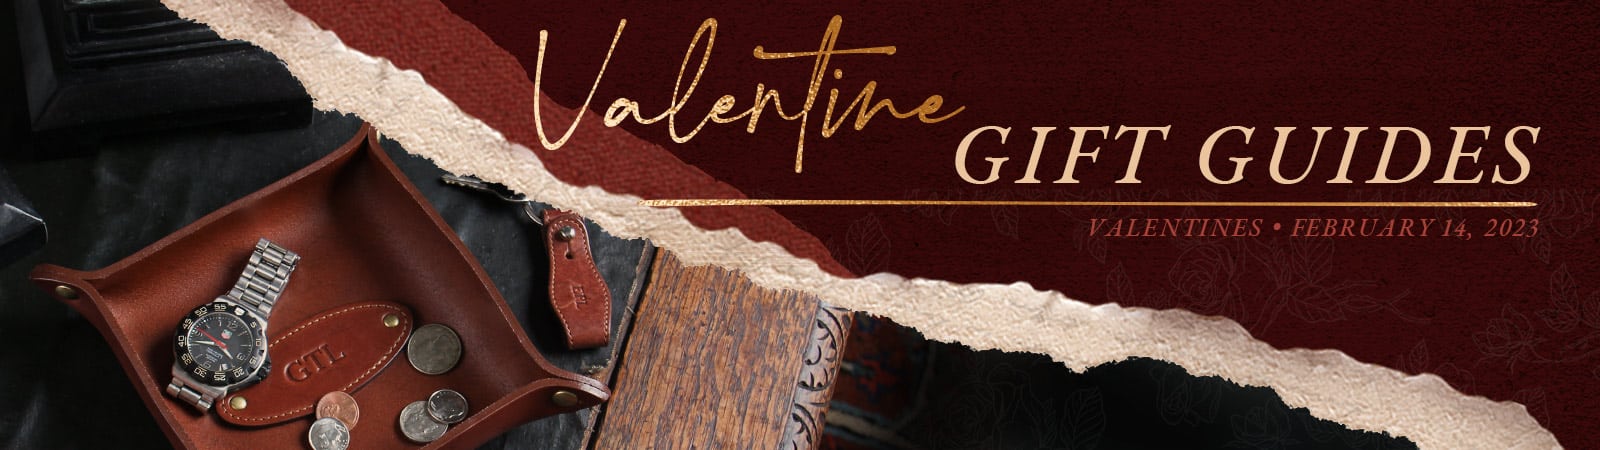 Valentine Gift Guides - Valentines Day, February 14, 2023